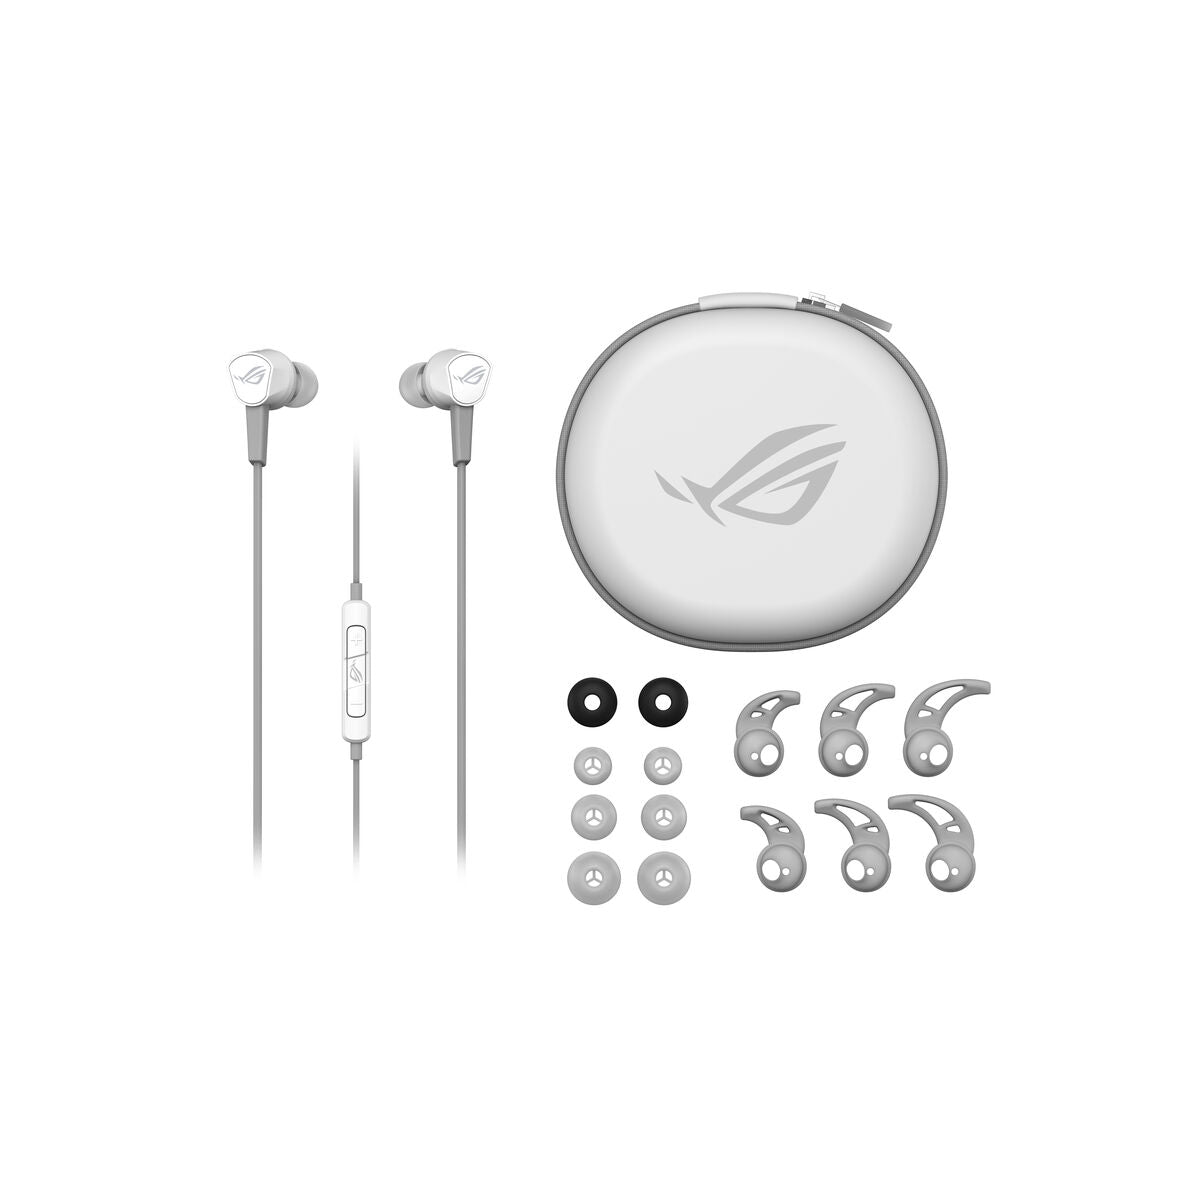 Headphones Asus Cetra II Core White, Asus, Electronics, Mobile communication and accessories, headphones-asus-cetra-ii-core-white, Brand_Asus, category-reference-2609, category-reference-2642, category-reference-2847, category-reference-t-19653, category-reference-t-21312, category-reference-t-4036, category-reference-t-4037, computers / peripherals, Condition_NEW, entertainment, gadget, music, office, Price_50 - 100, telephones & tablets, Teleworking, RiotNook